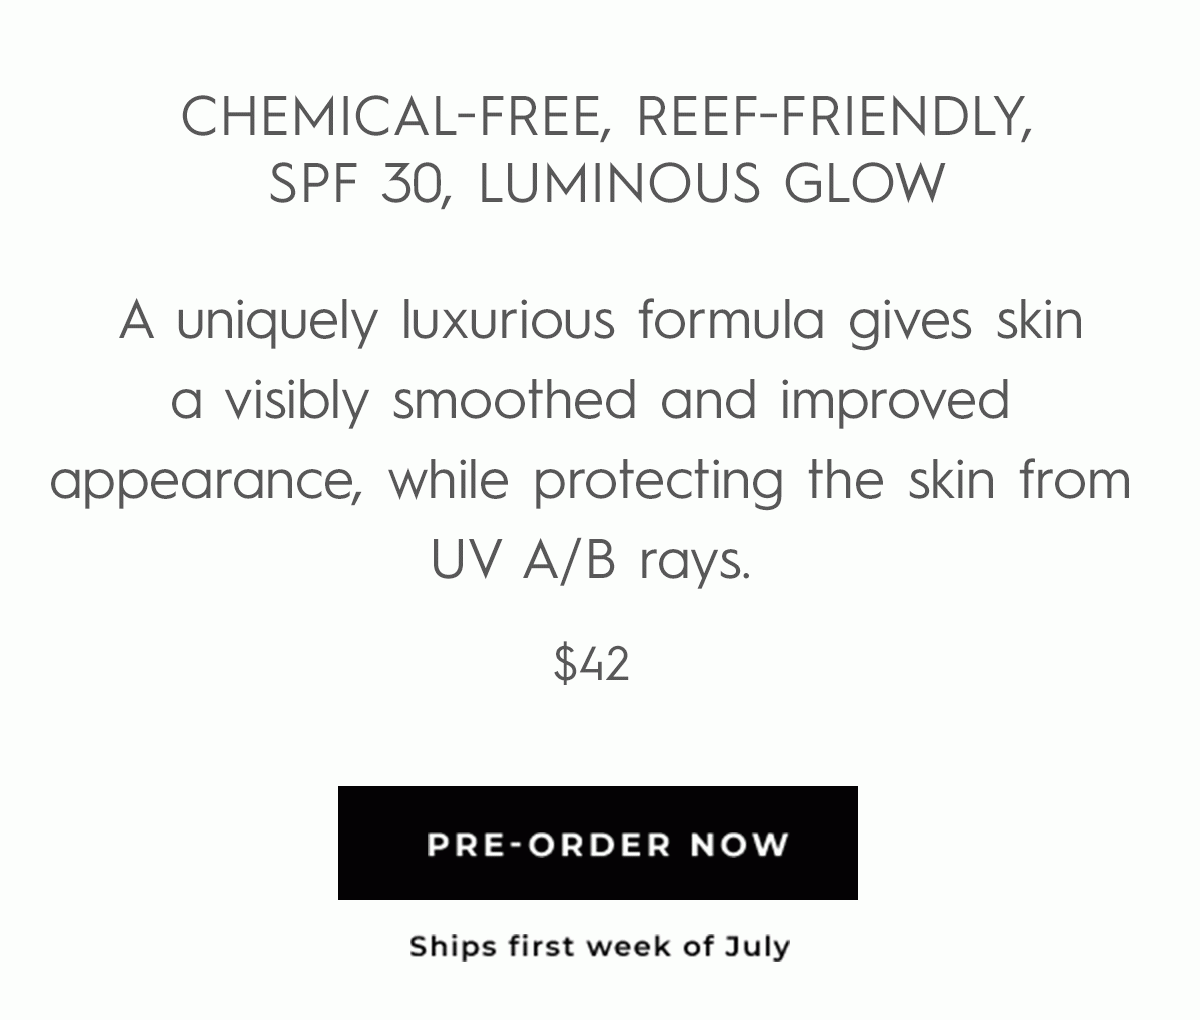 Chemical-Free, Reef-Friendly, SPF 30, Luminous Glow - PRE-ORDER NOW